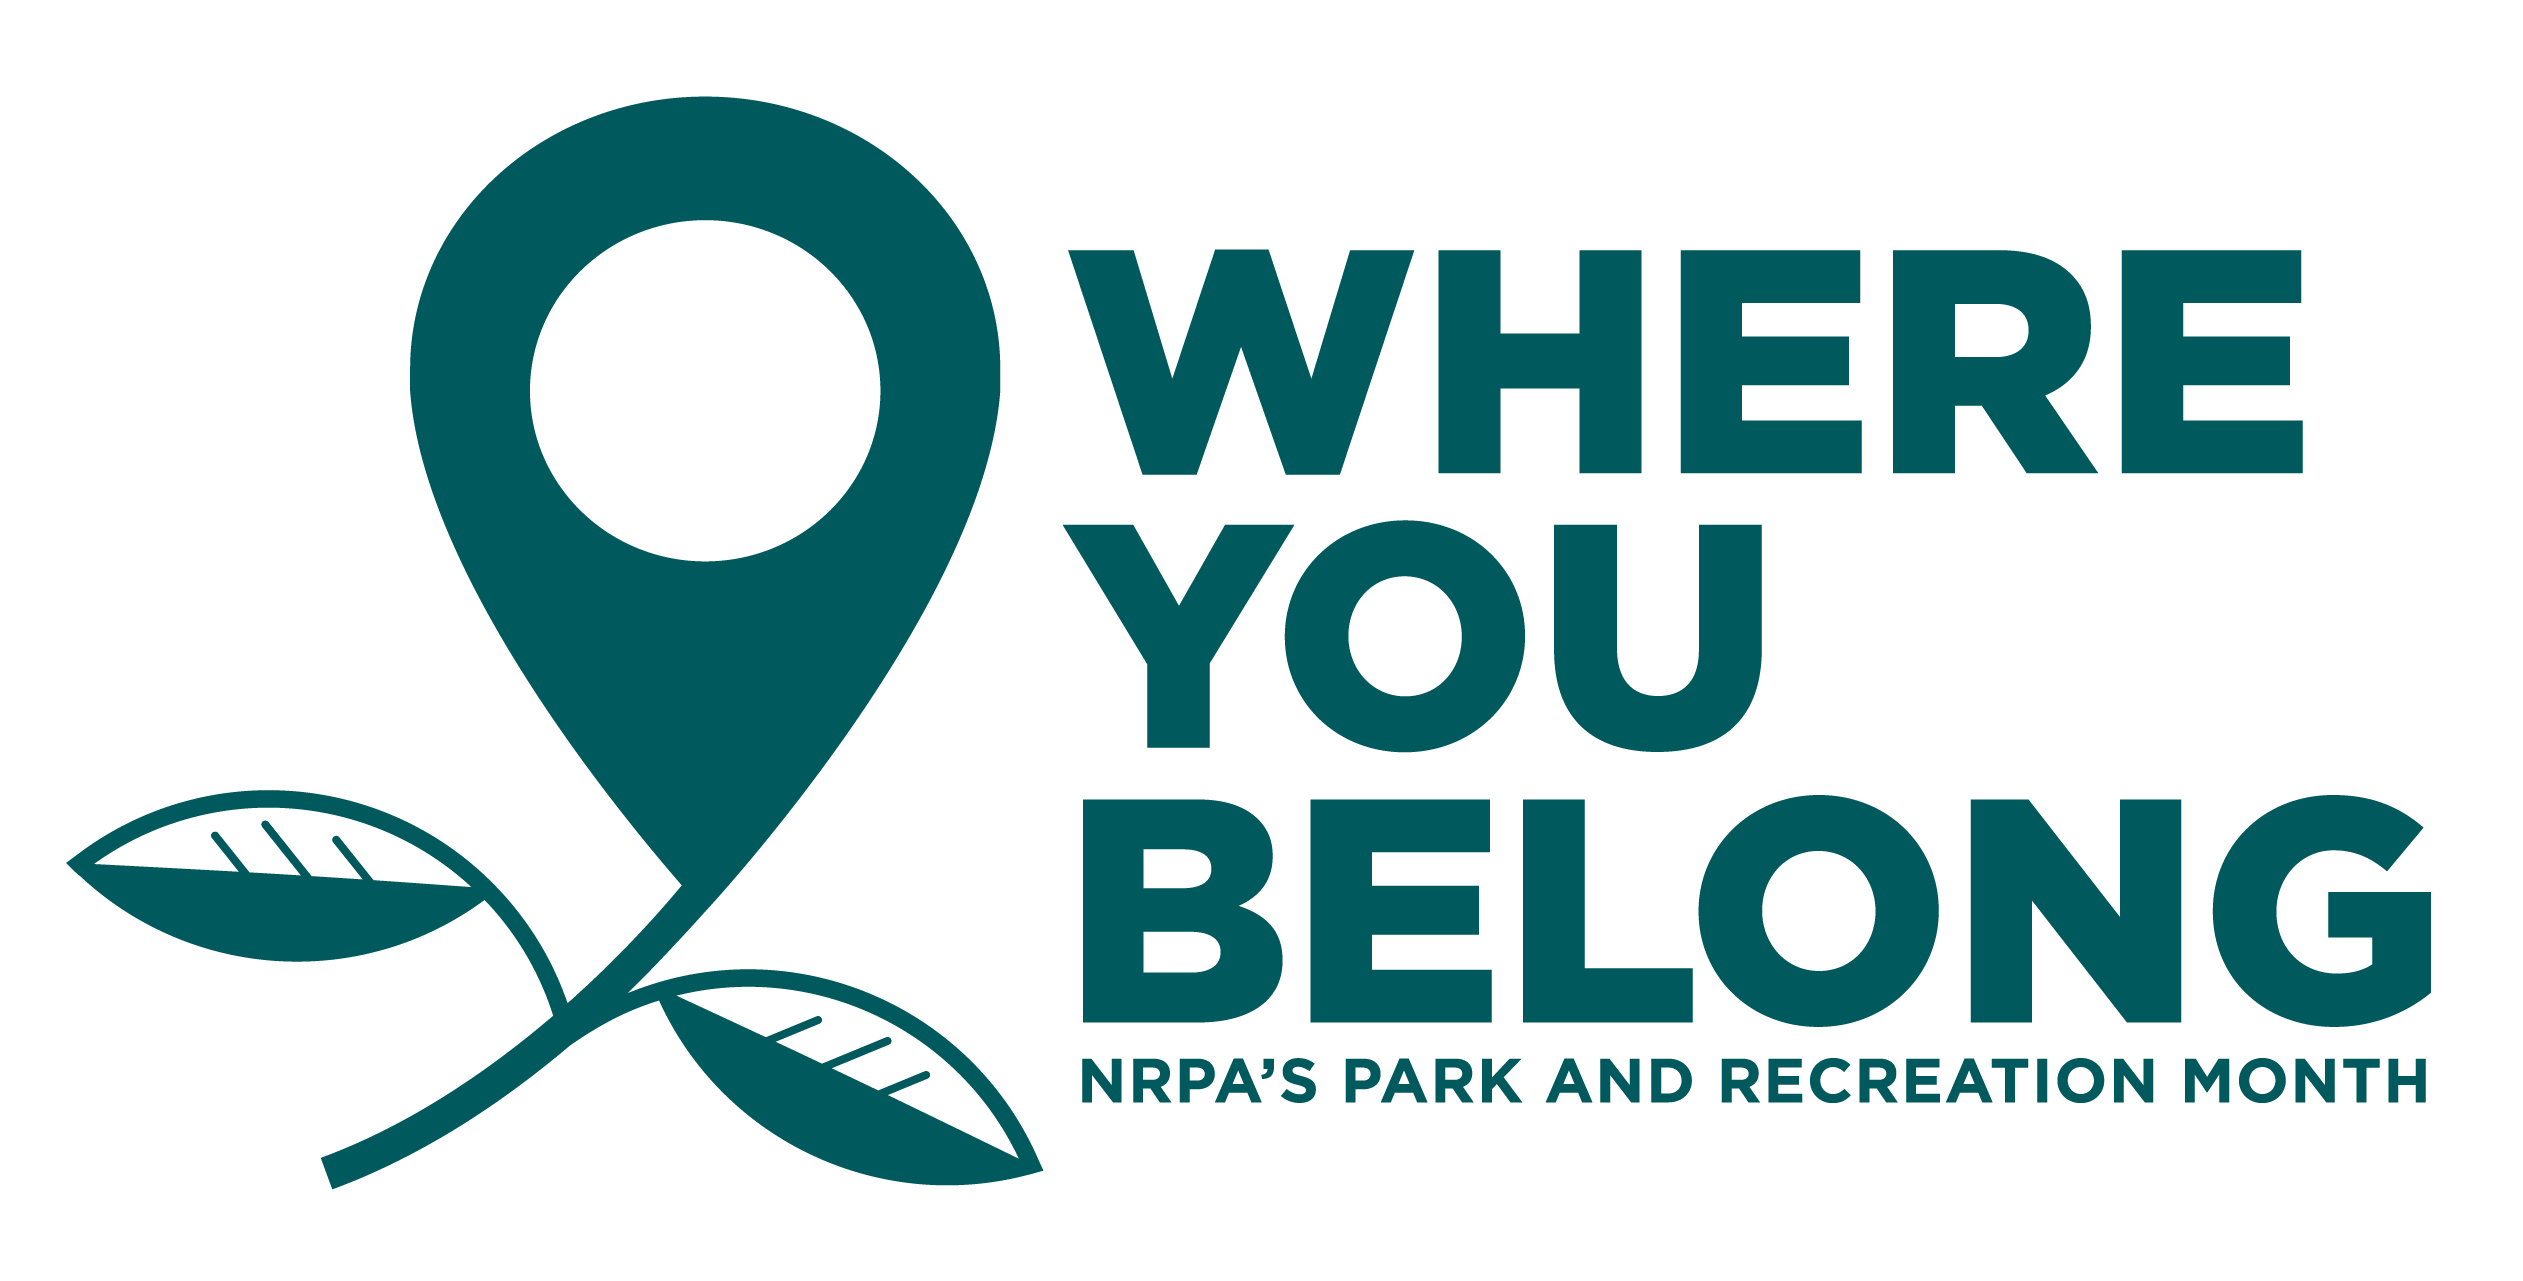 WHERE YOU BELONG - NRPA's Park and Recreation Month 